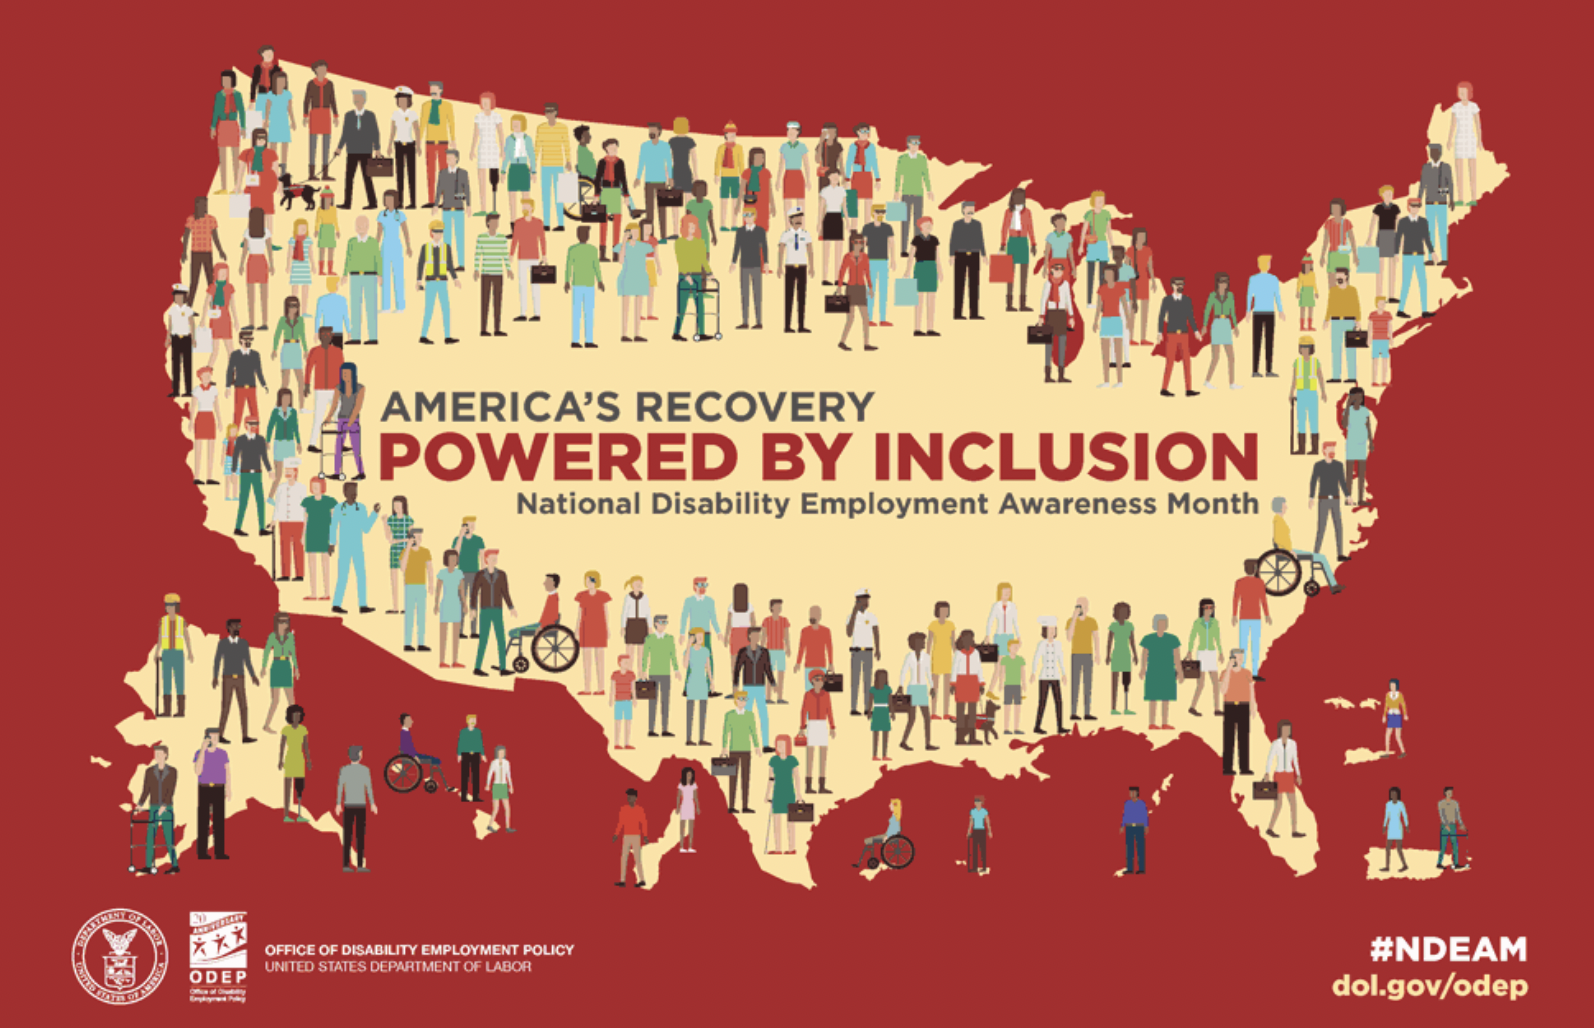 America's Recovery Powered by Inclusion